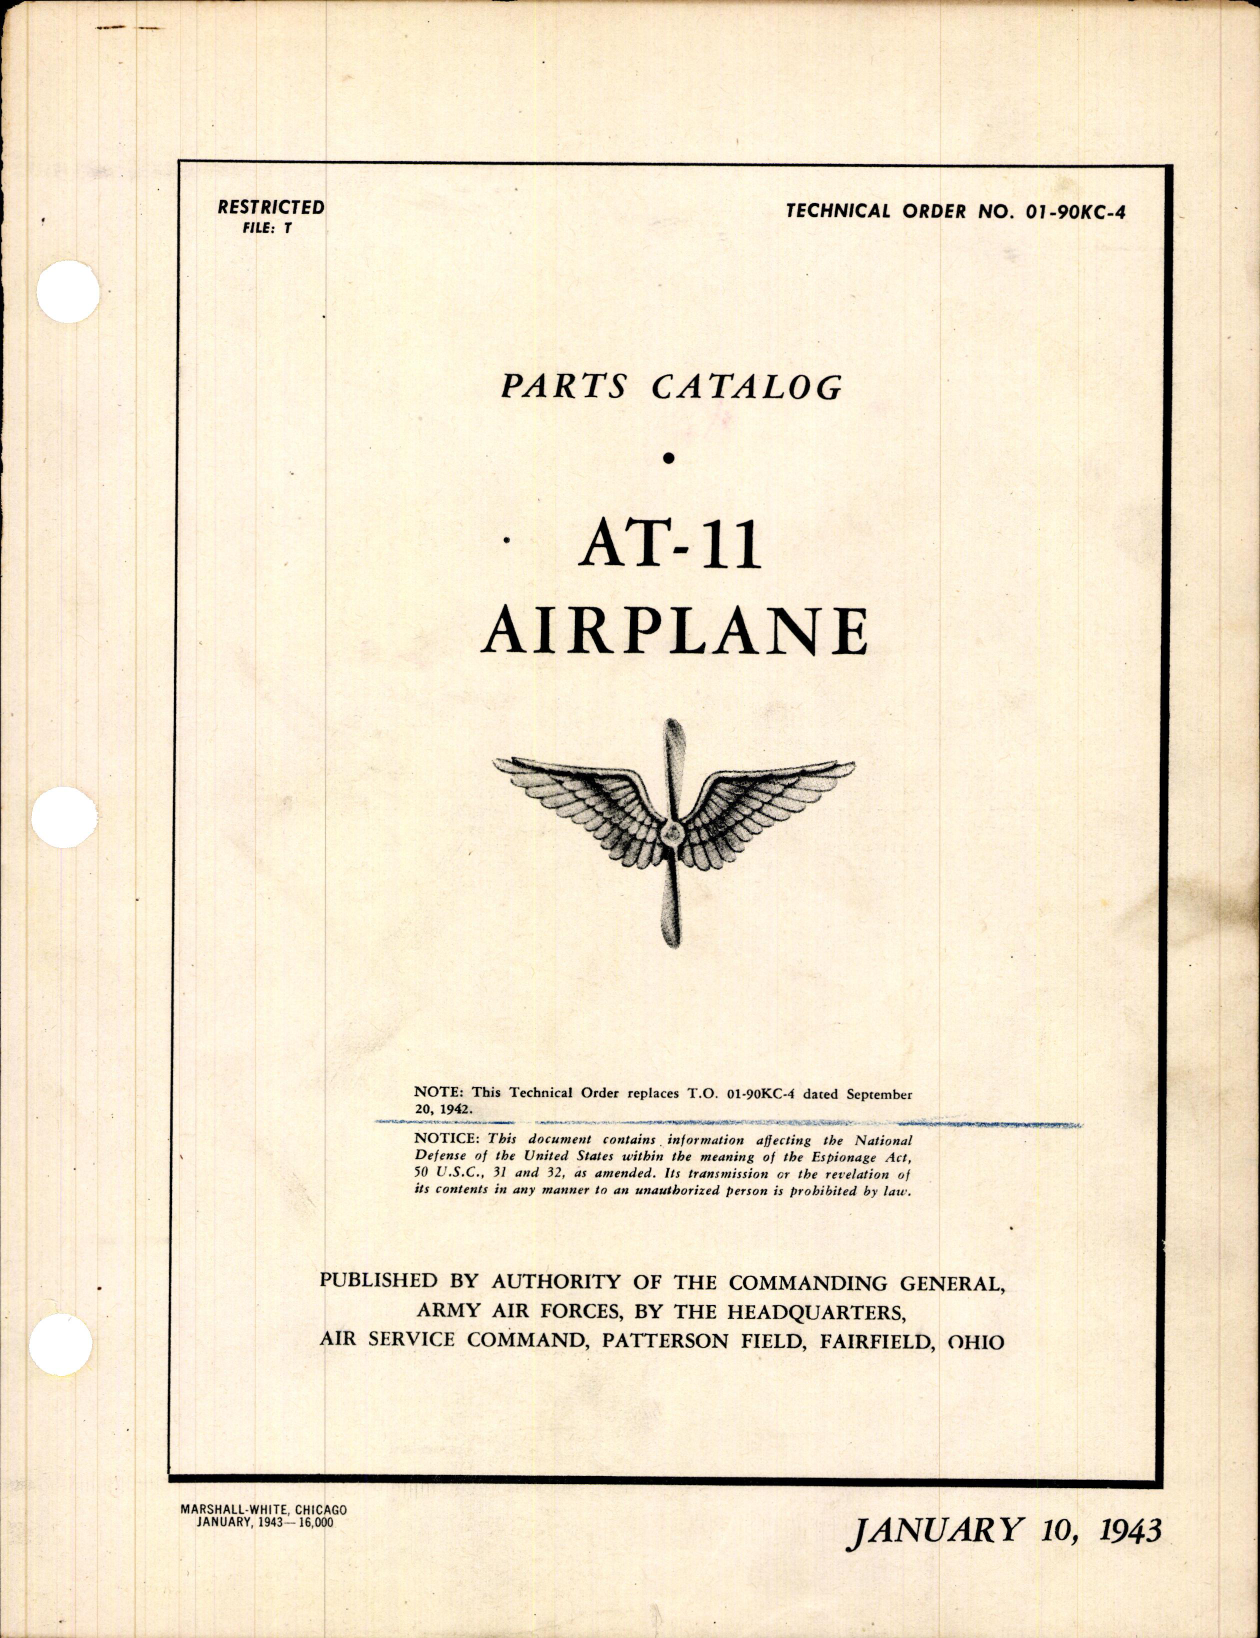 Sample page 1 from AirCorps Library document: Parts Catalog for AT-11 Airplane